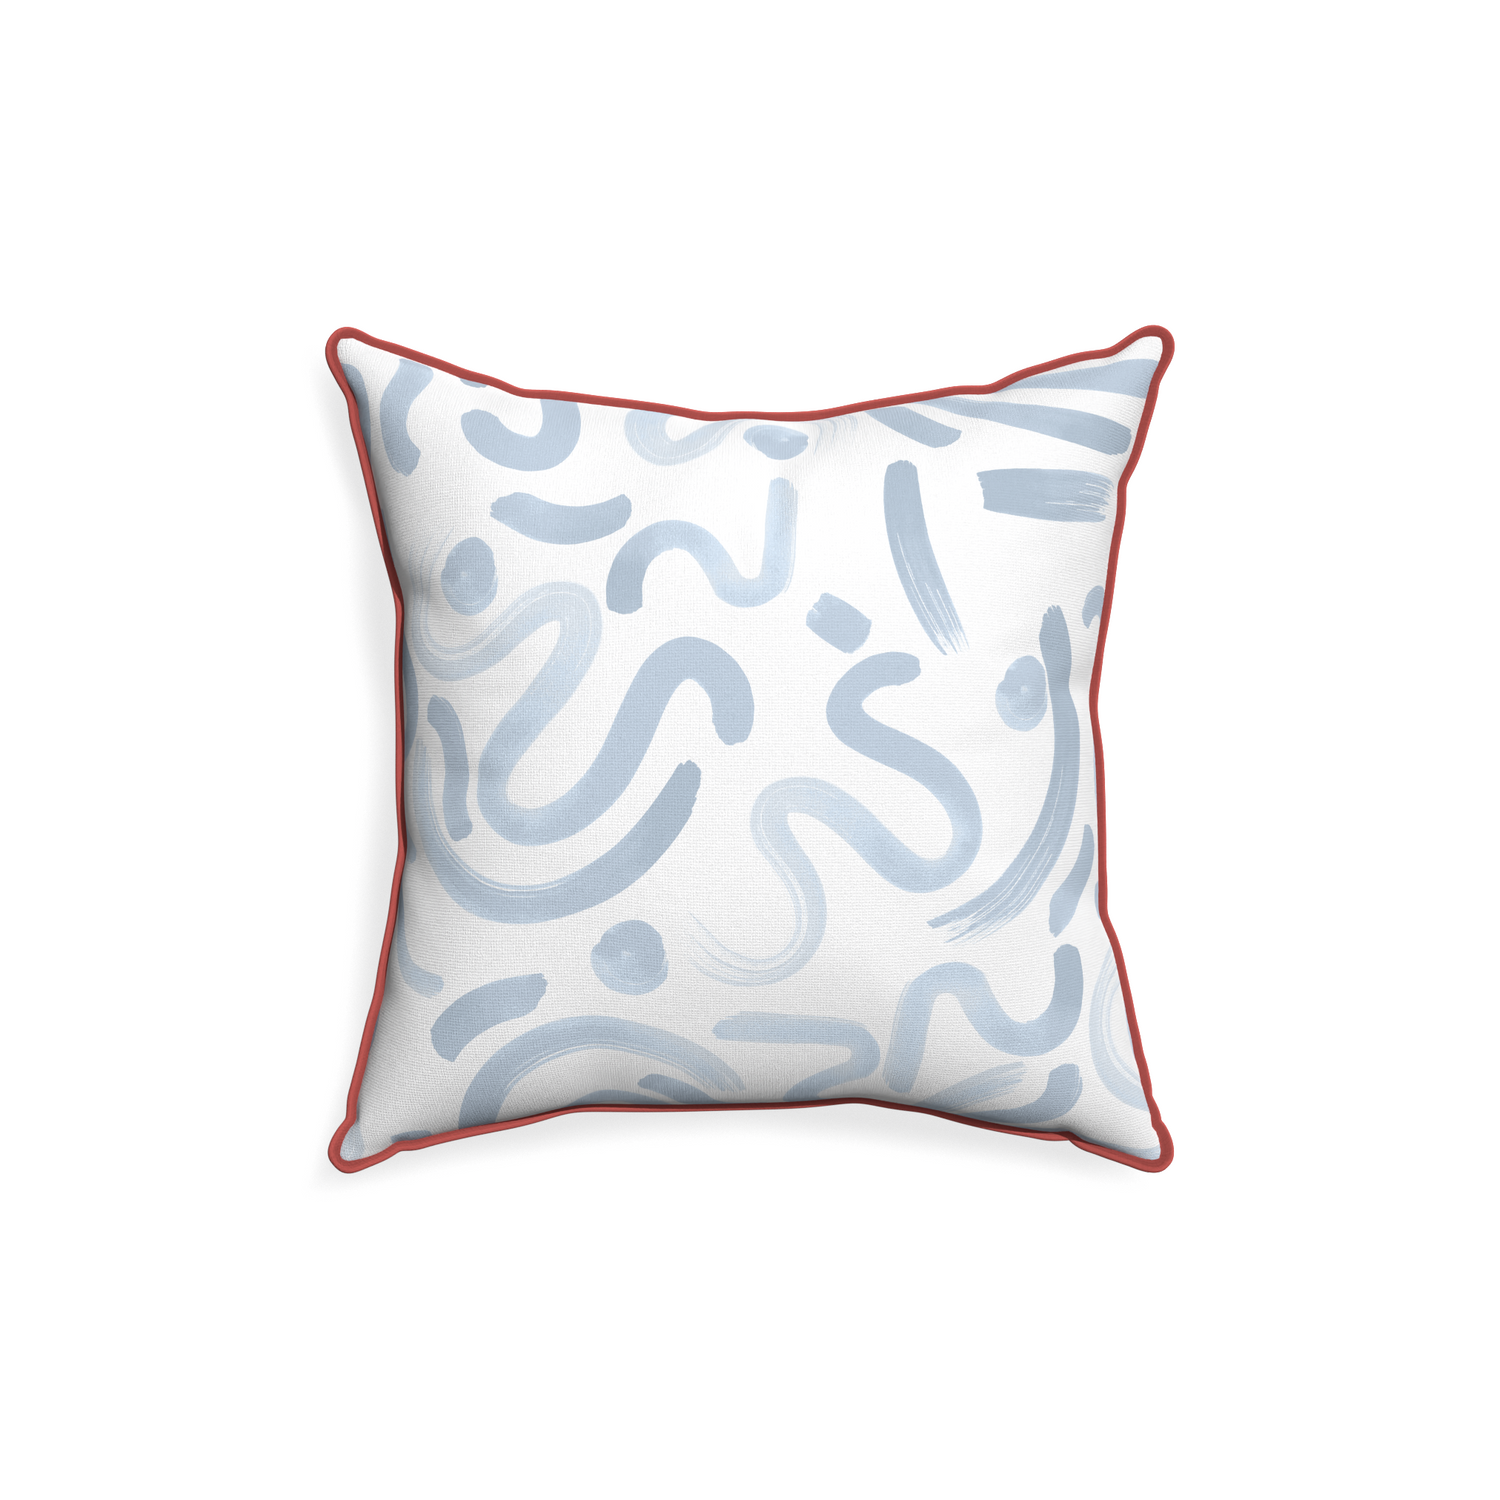 18-square hockney sky custom pillow with c piping on white background